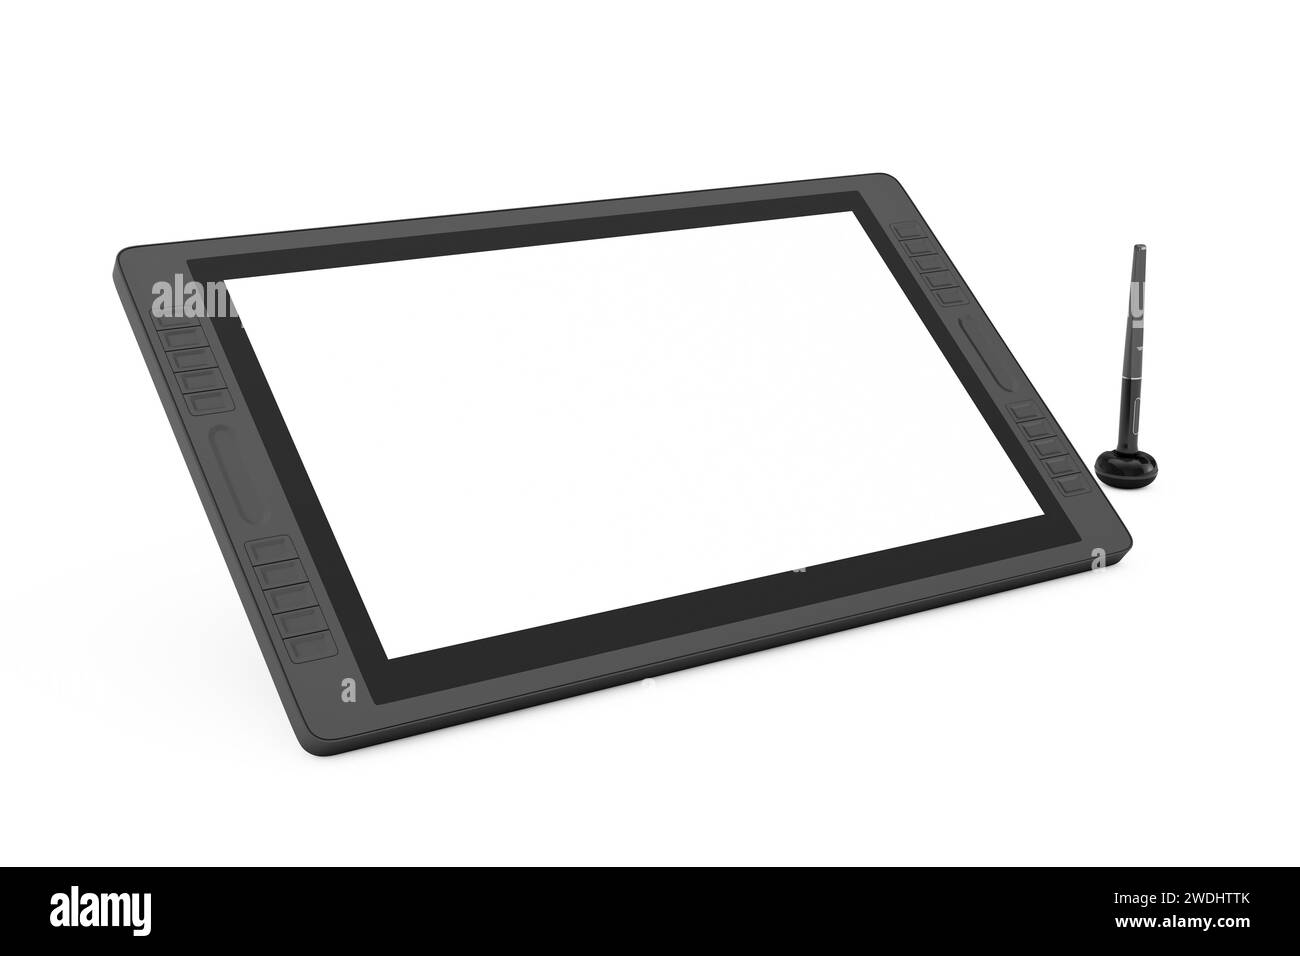 Big Size of Digital Graphics Drawing Tablet Monitor with Pen and Blank Screen for Your Design on a white background. 3d Rendering Stock Photo